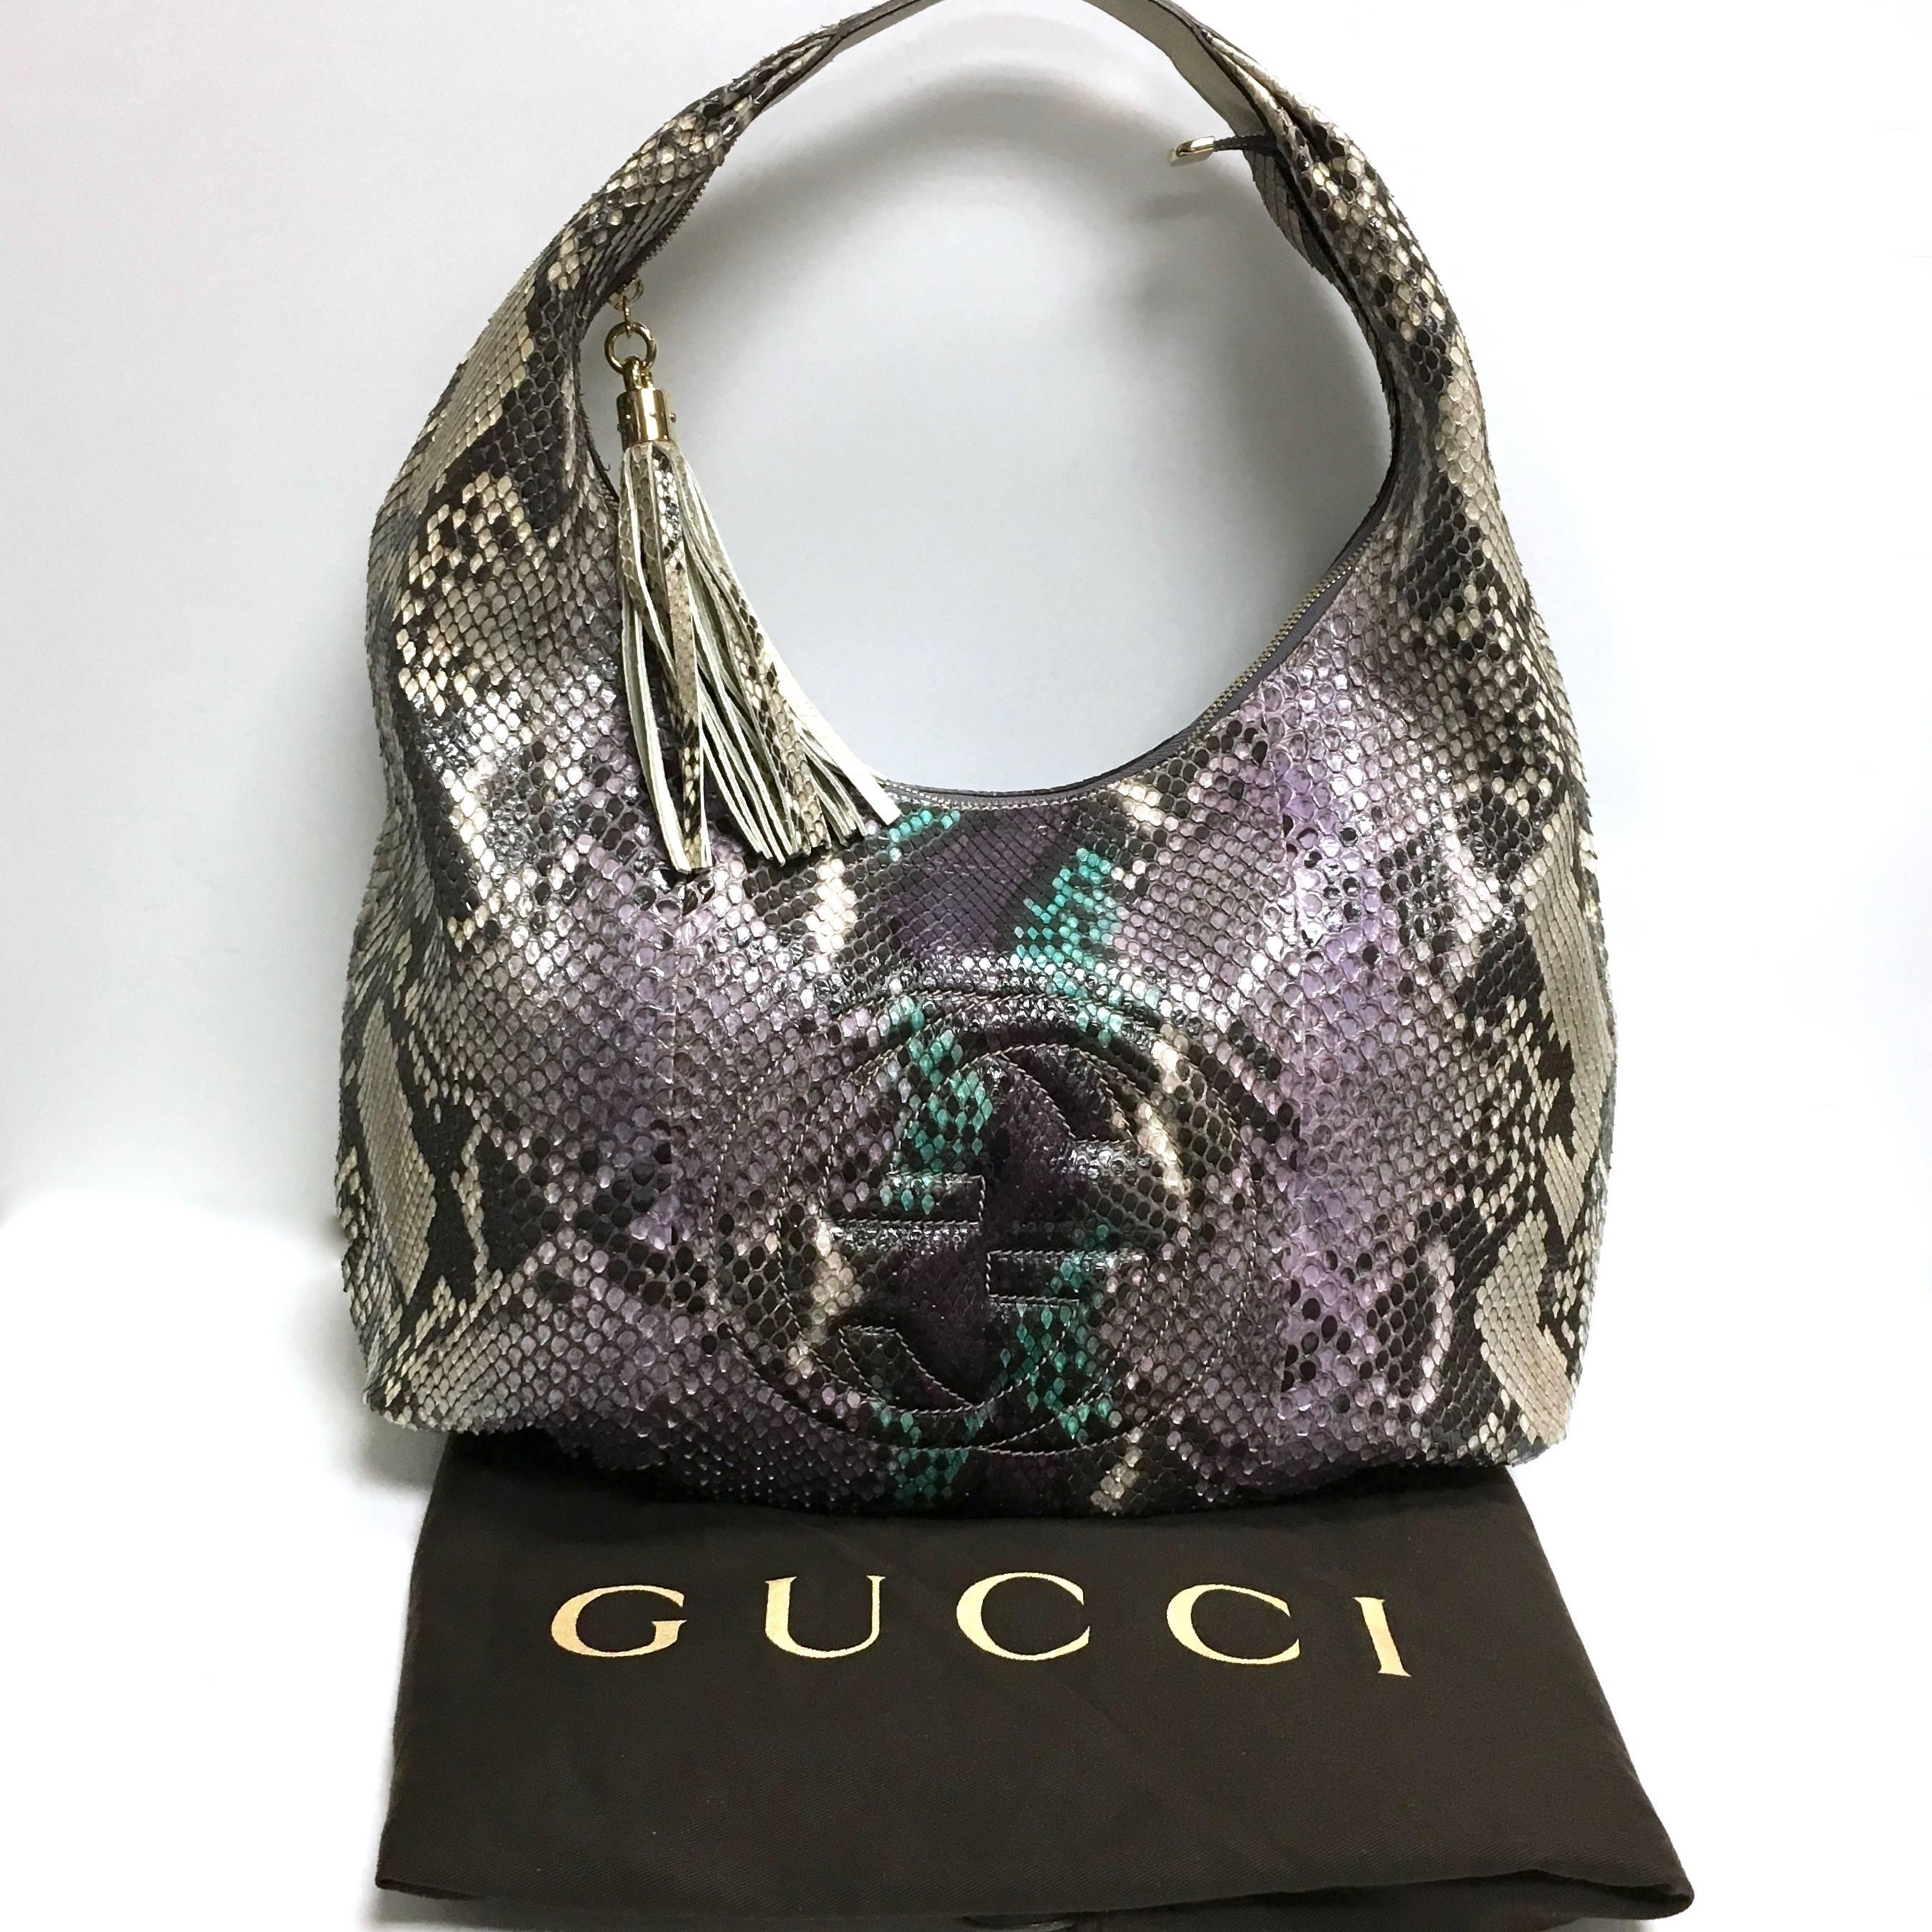 This statement hobo is crafted of exquisite python with purple, turquoise, and mauve accents. The bag features a looping shoulder strap, a frontal stitched interlocking GG logo and a brass knobbed python tassel zipper pull. The top unzips to a